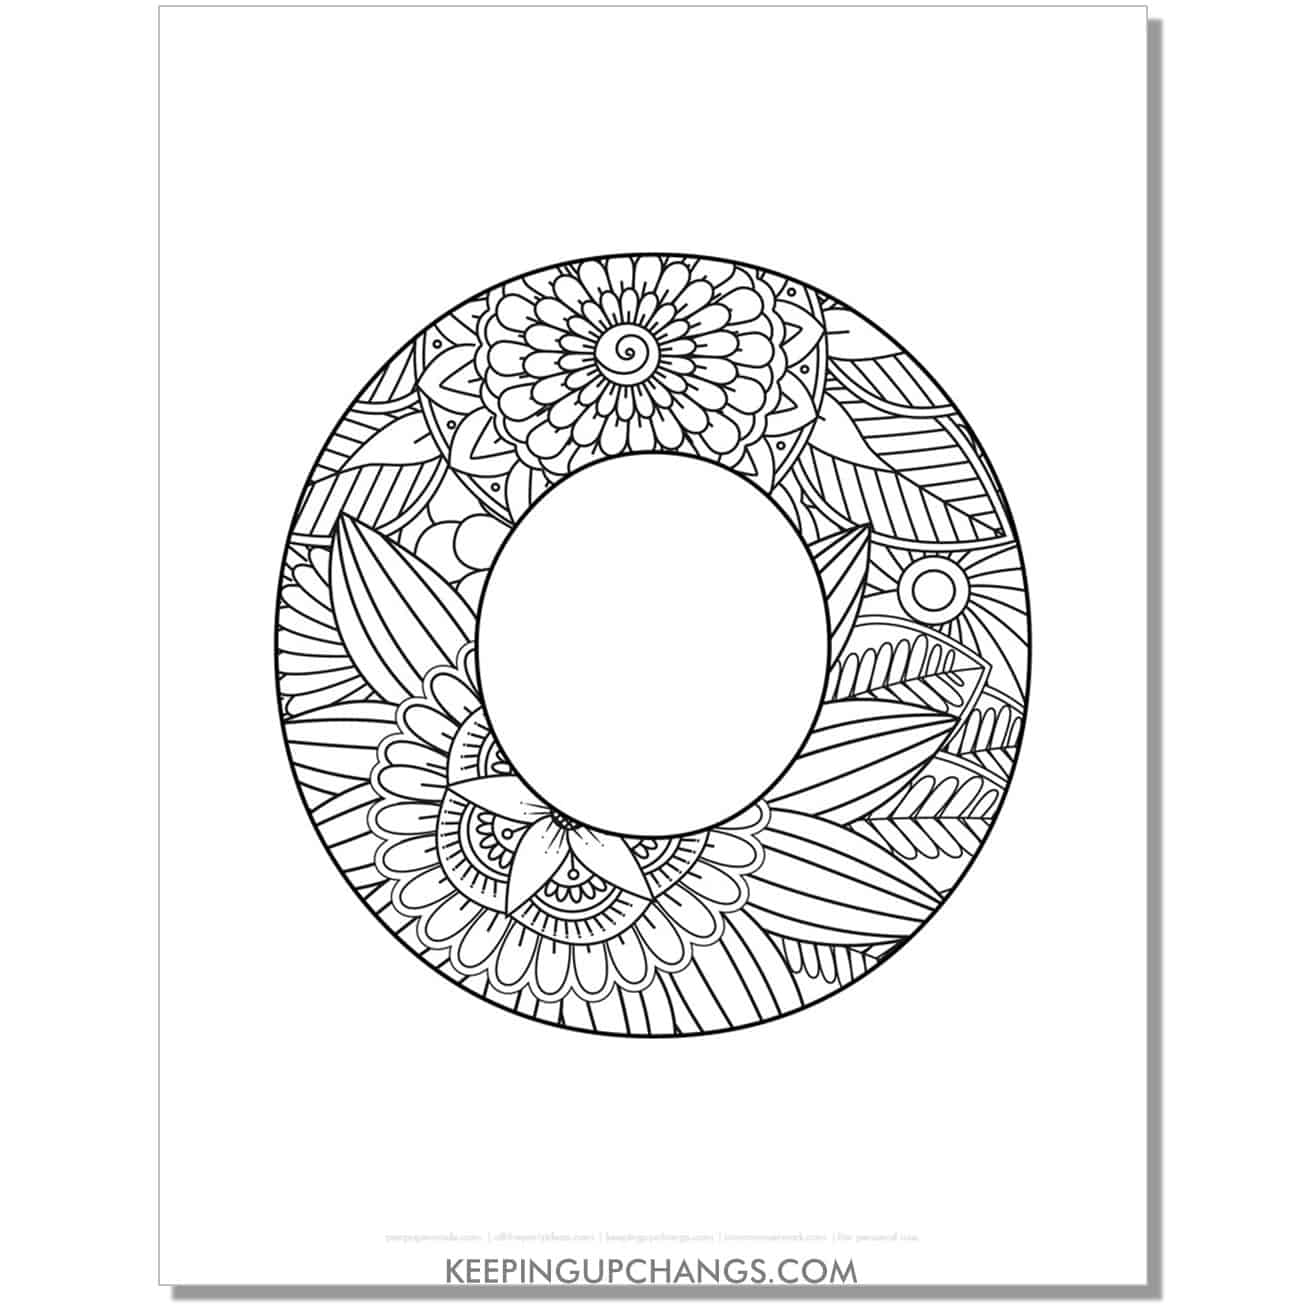 free letter o to color, complex mandala zentangle for adults.